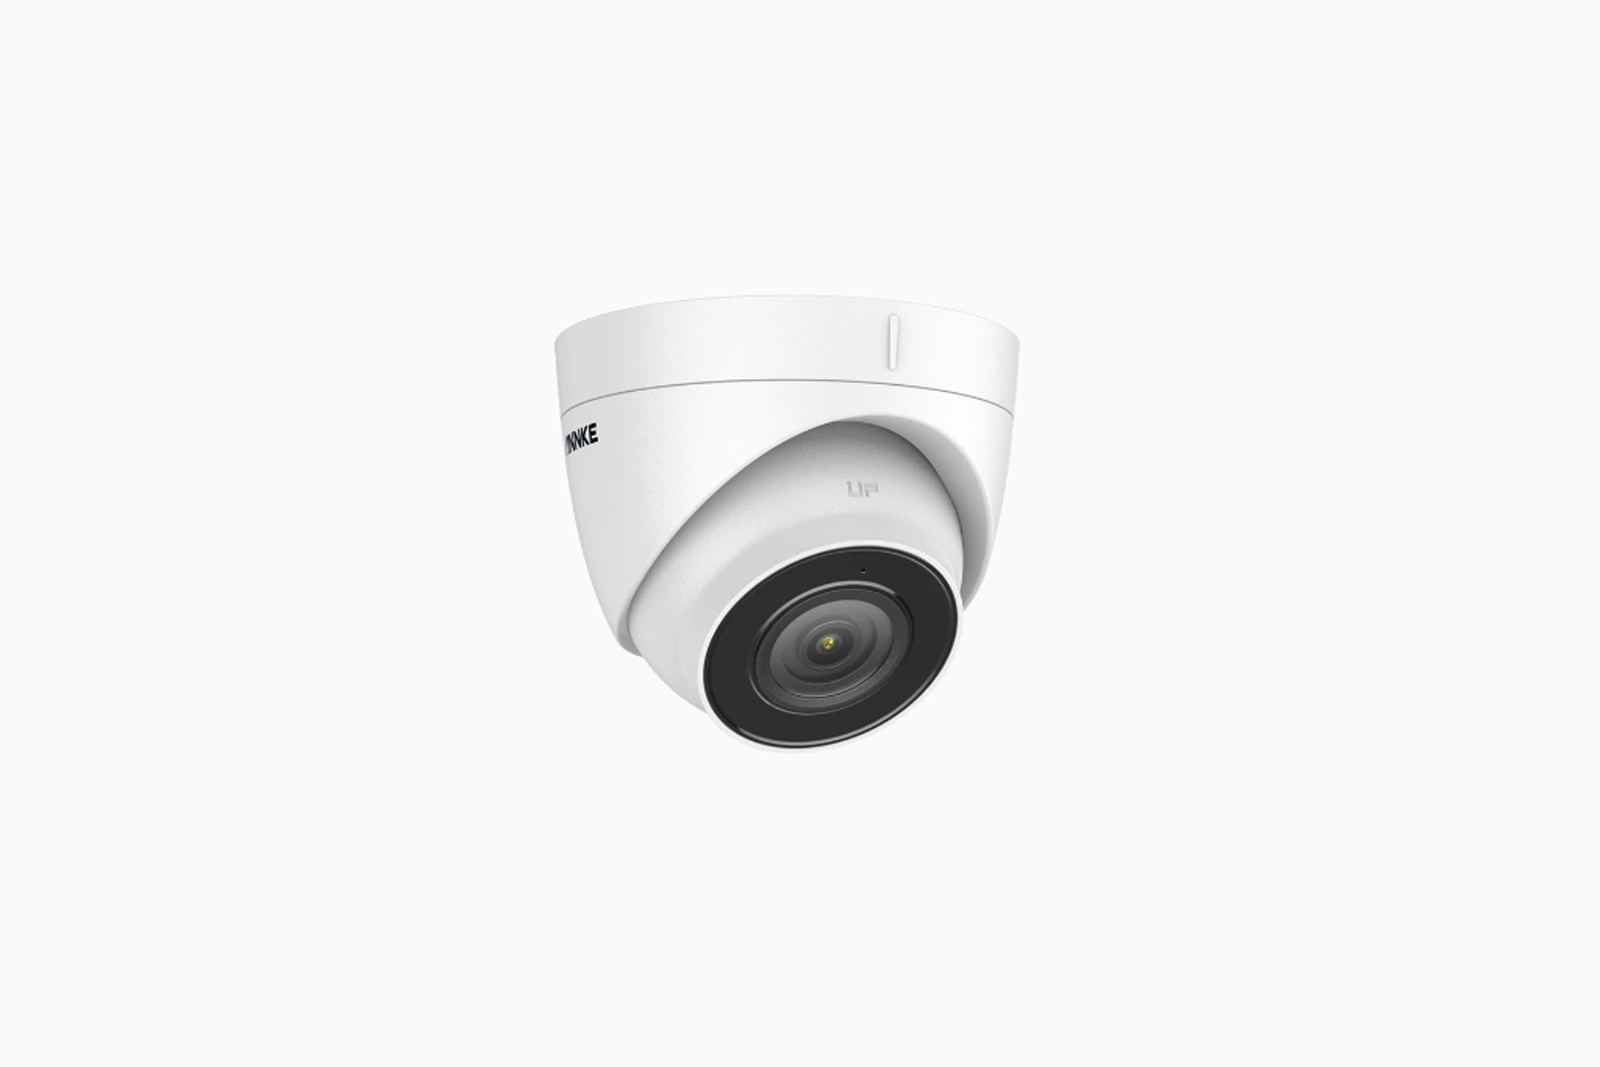 Annke offers up to 45% discount on smart security cameras for Black Friday photo 7